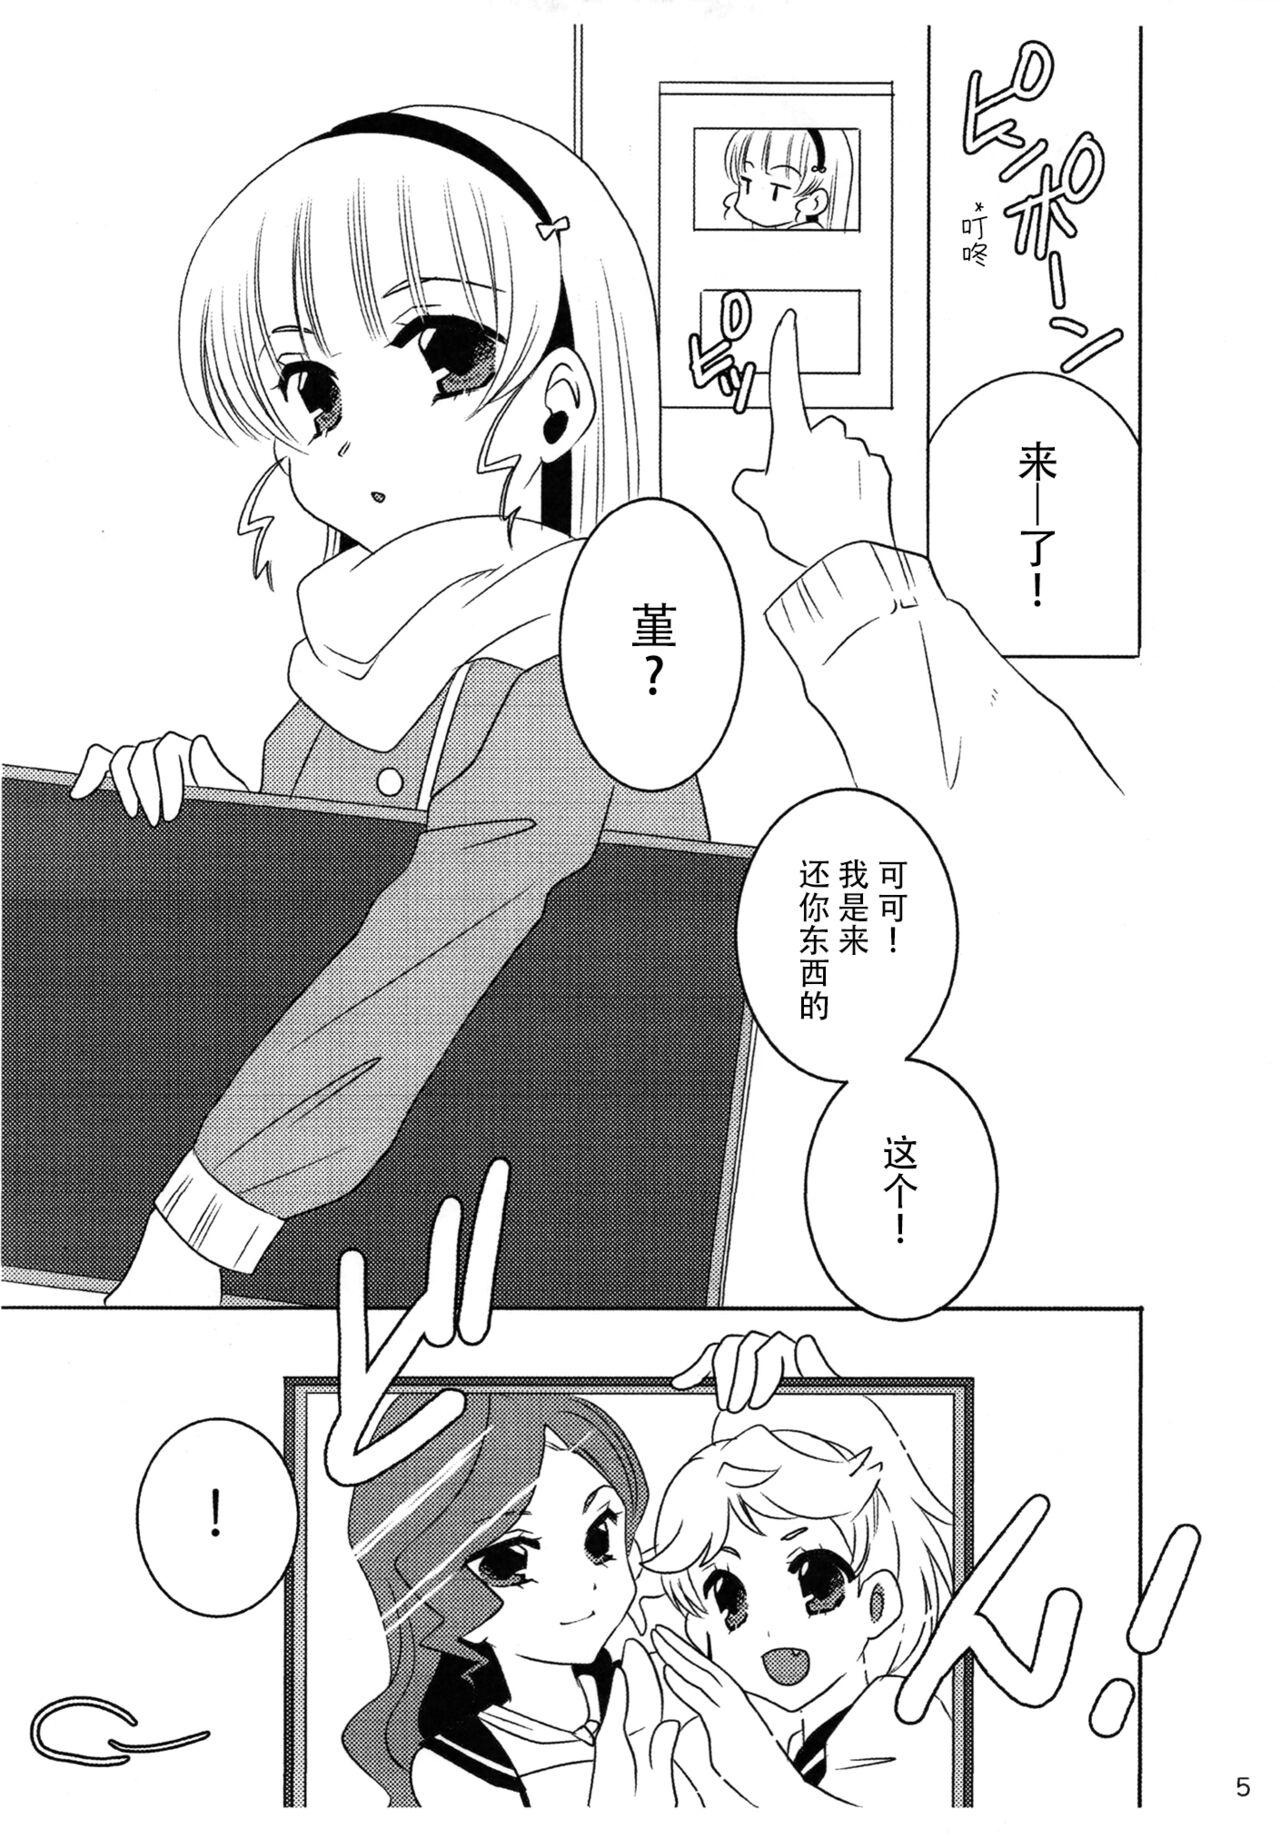 Chupando SeesawGame. 4 - Love live superstar Gay Blondhair - Page 4